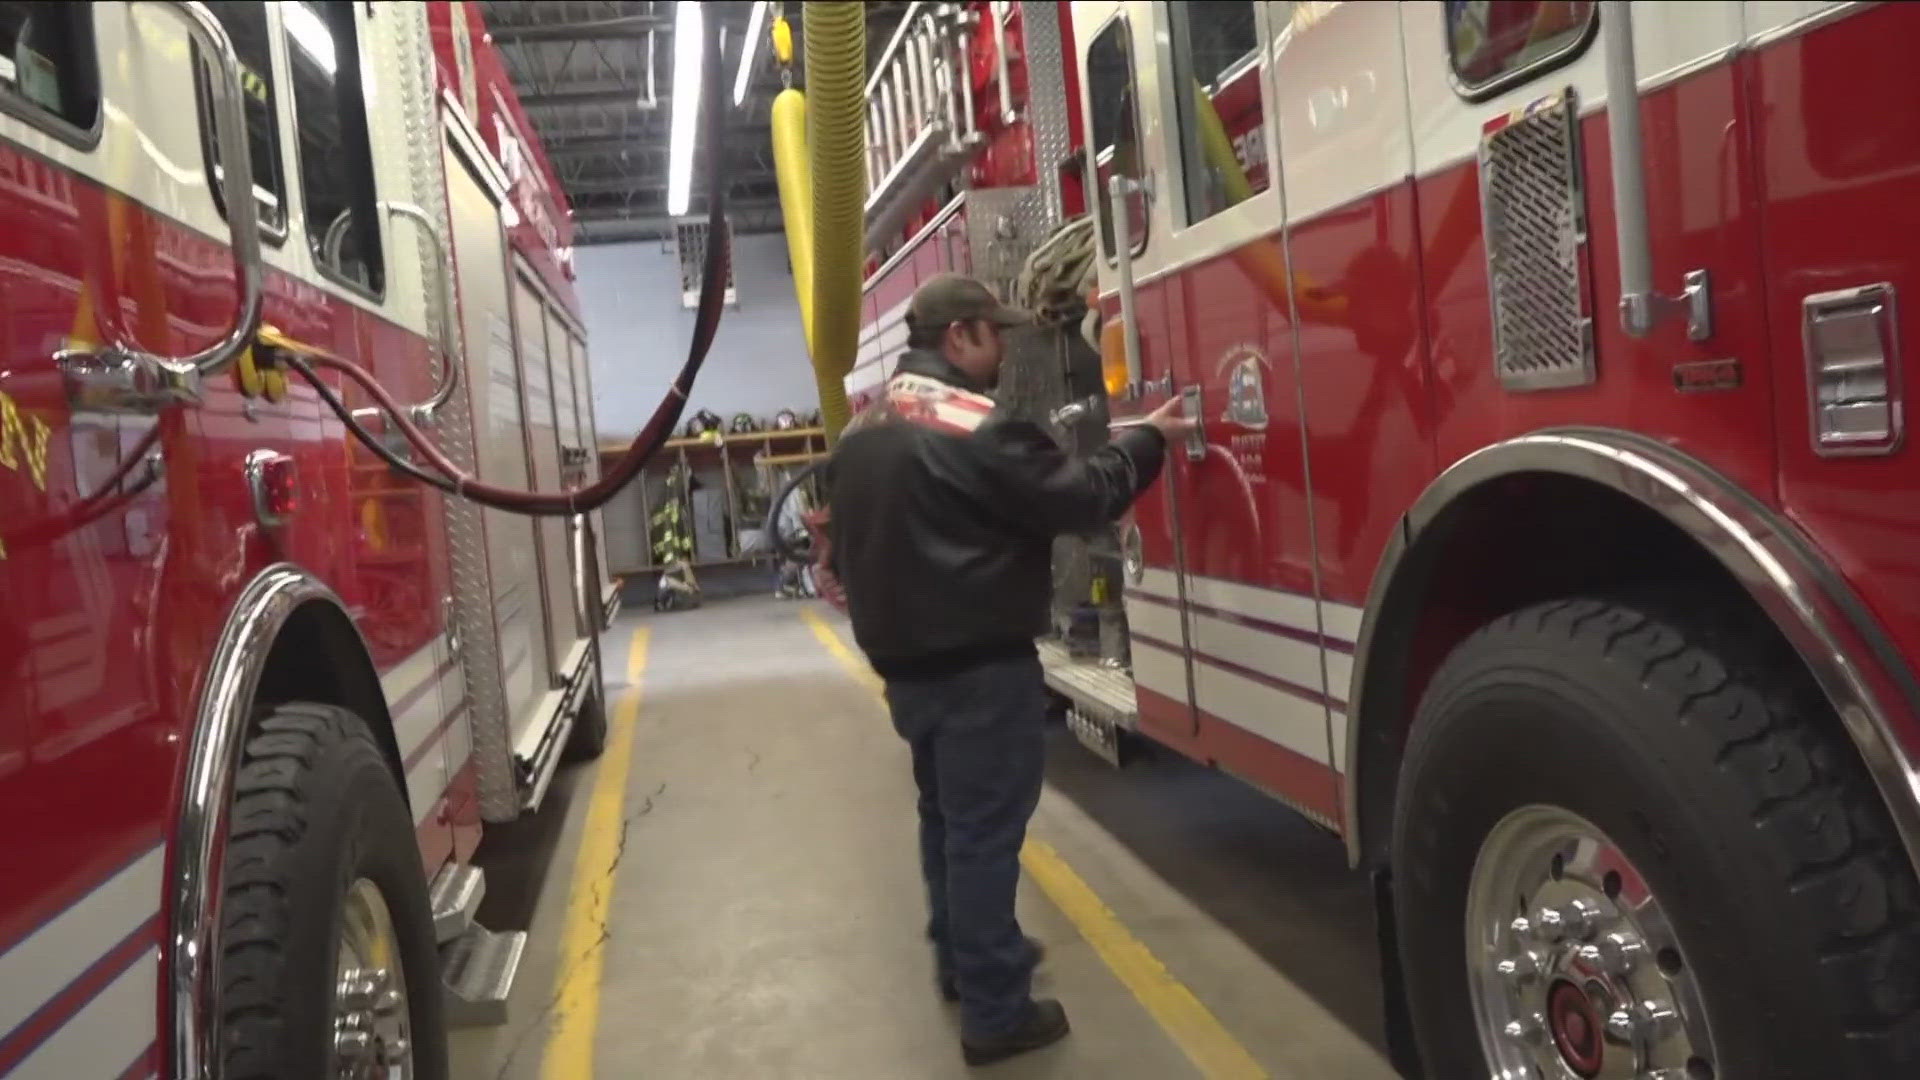 New funding would provide new equipment and fight staffing shortages.